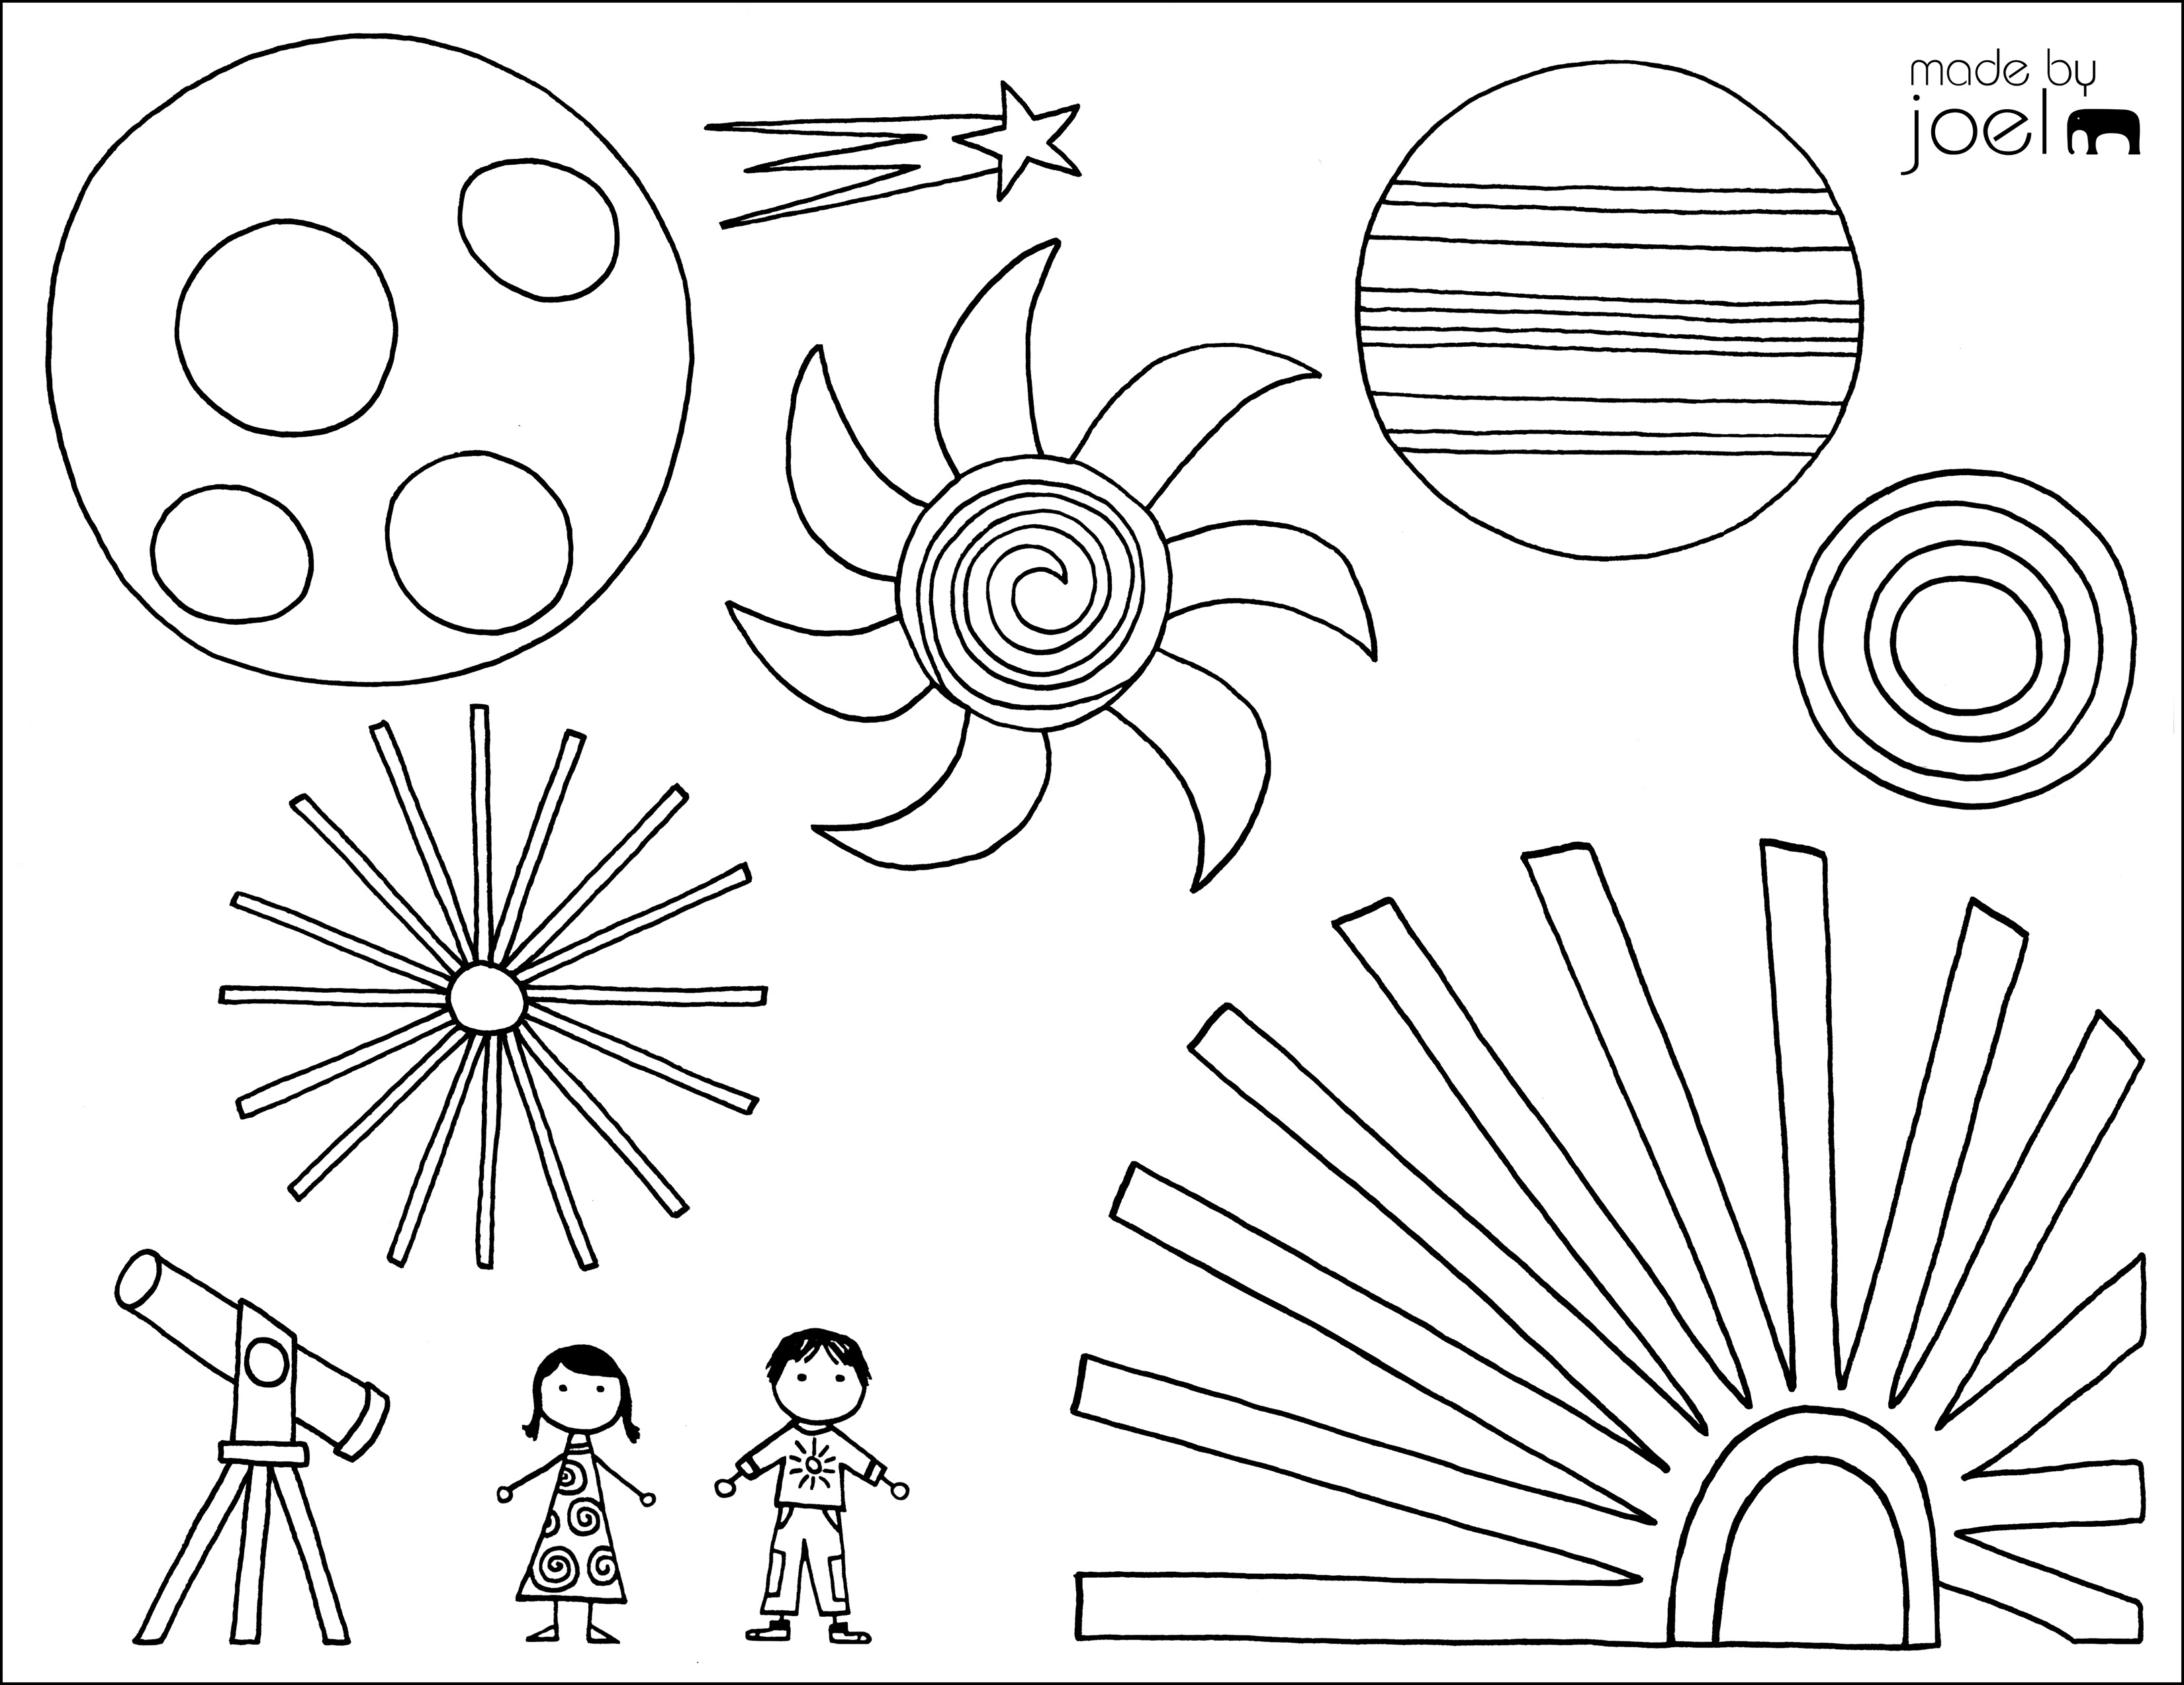 https://madebyjoel.com/wp-content/uploads/2013/04/Made-by-Joel-Coloring-Sheet-Kids-Craft-for-Lori-Henriques-Music-Video.jpg